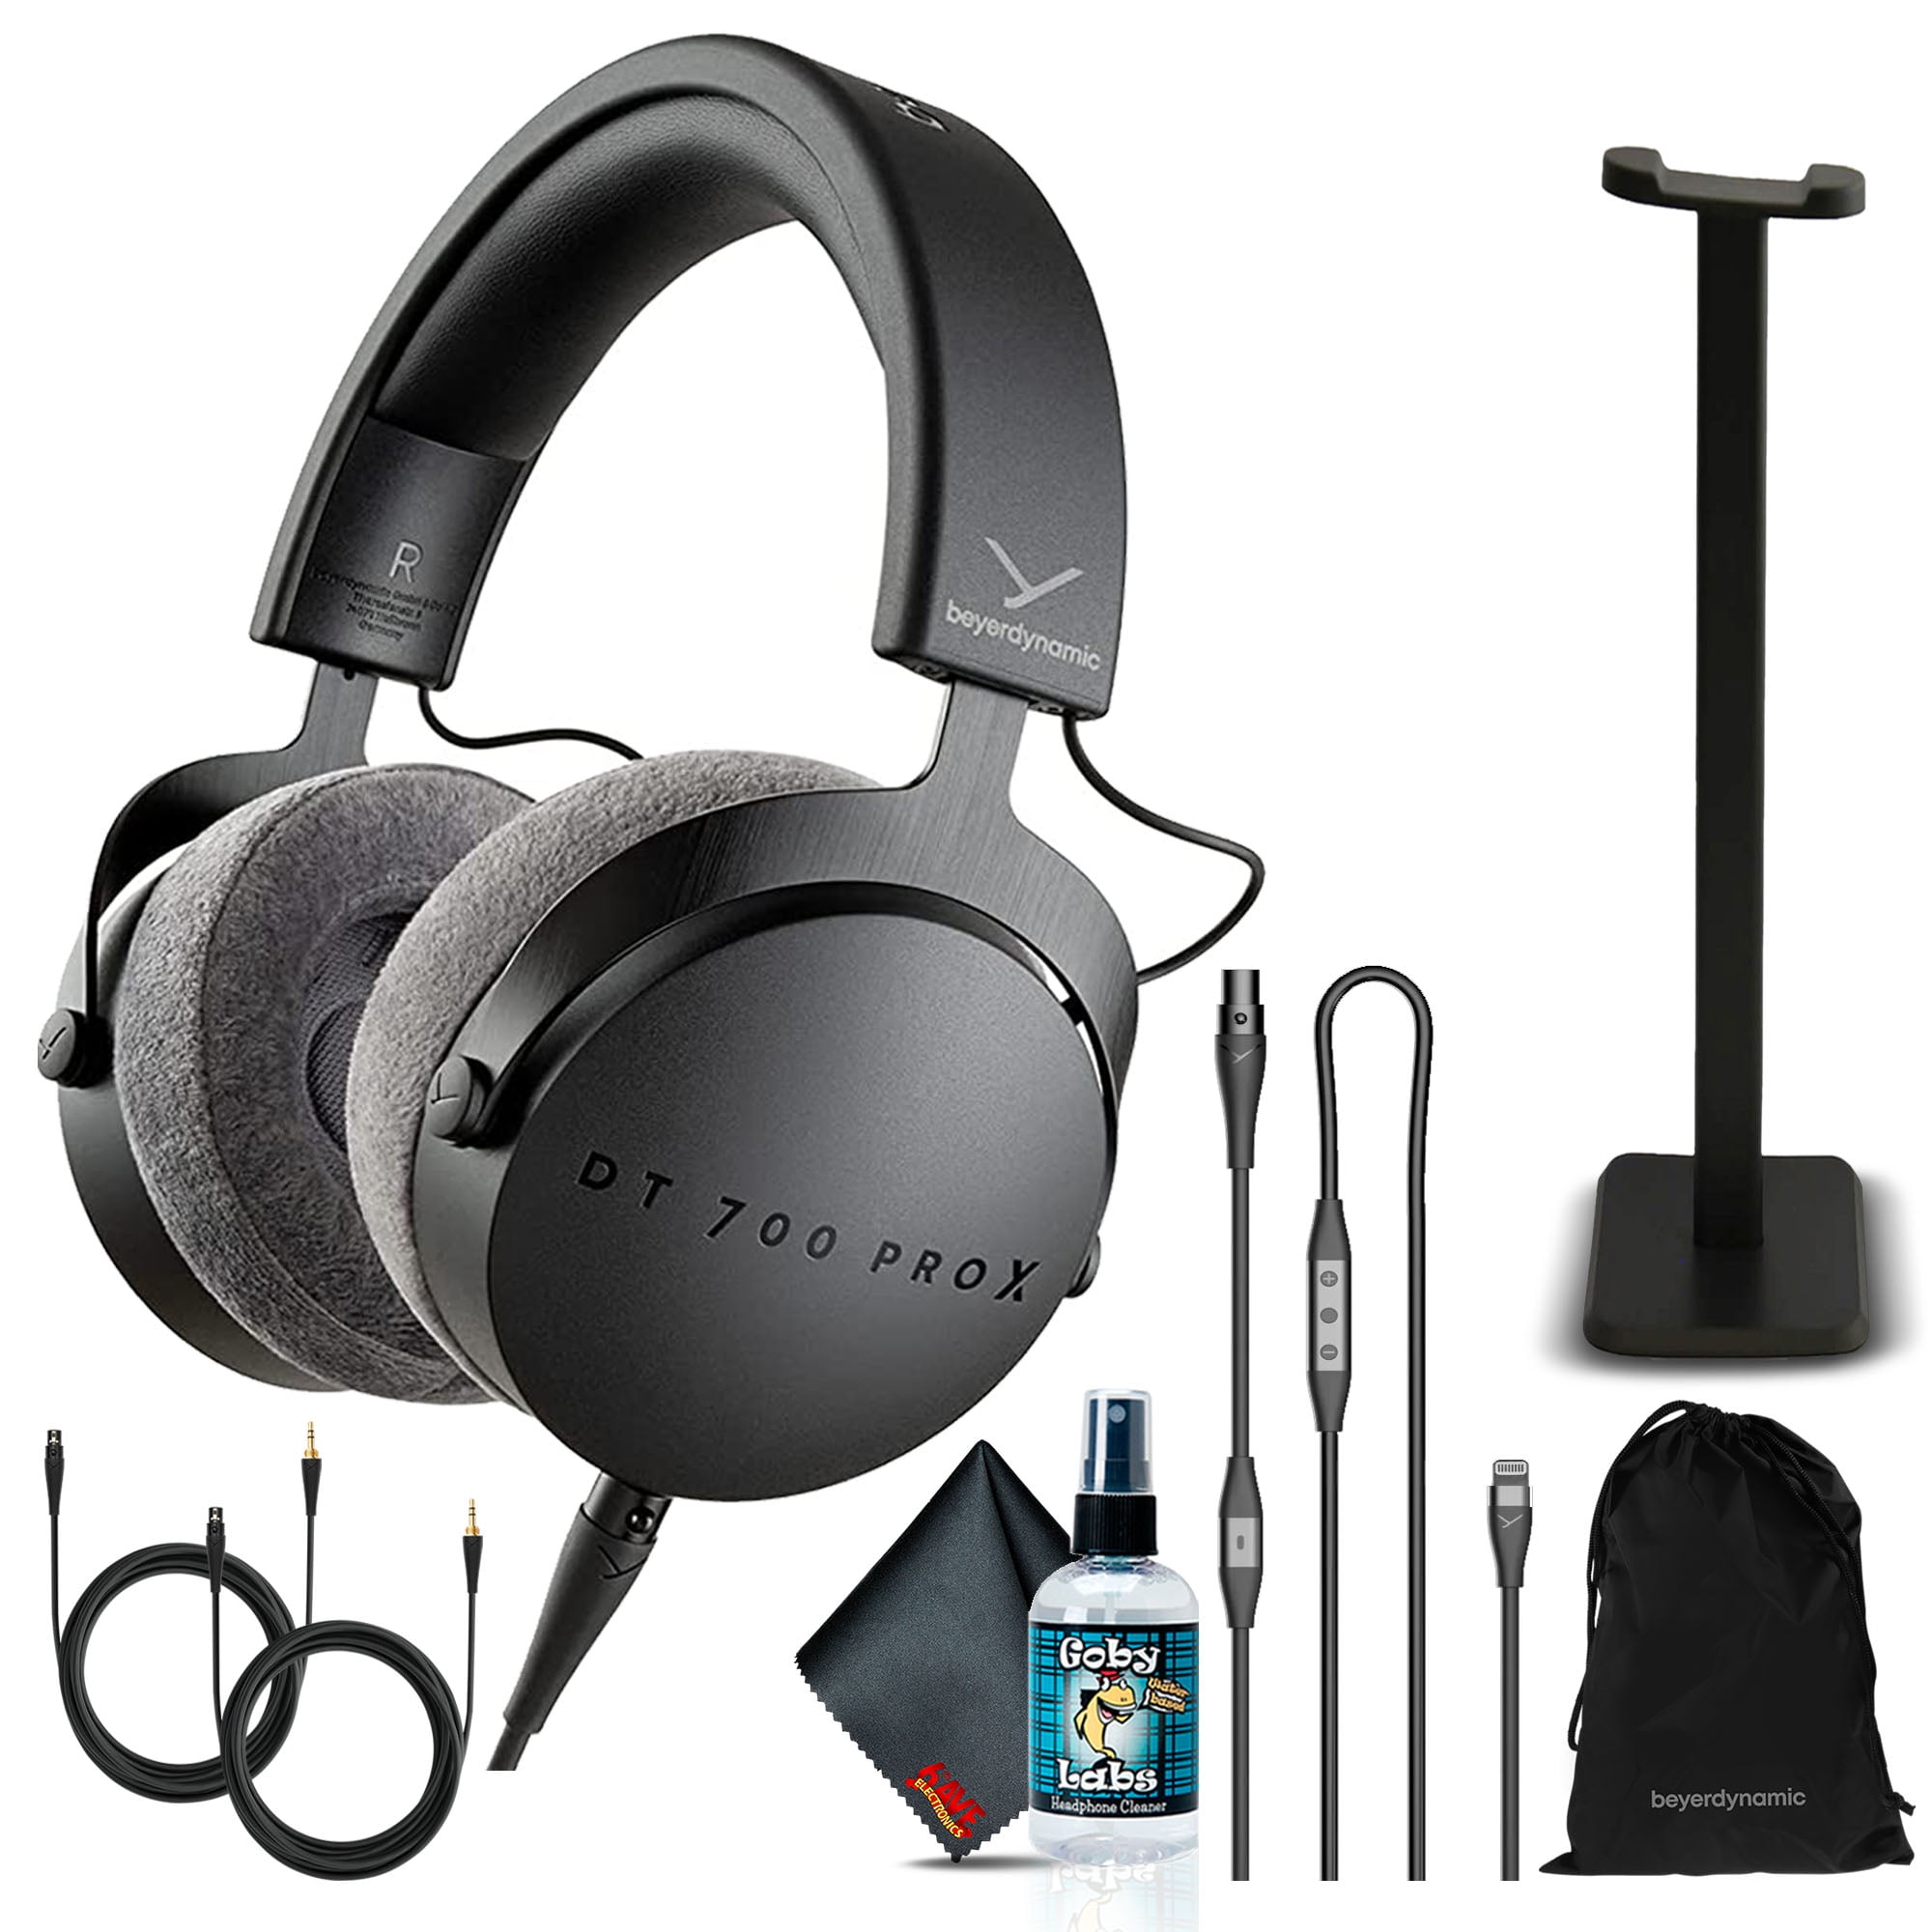 Despertar fuego explique Beyerdynamic DT 700 Pro X Closed-Back Studio Headphones Bundle with Detachable  Cable, Lightning Cable, Headphone Stand, and 6AVE Headphone Cleaning Kit -  Walmart.com